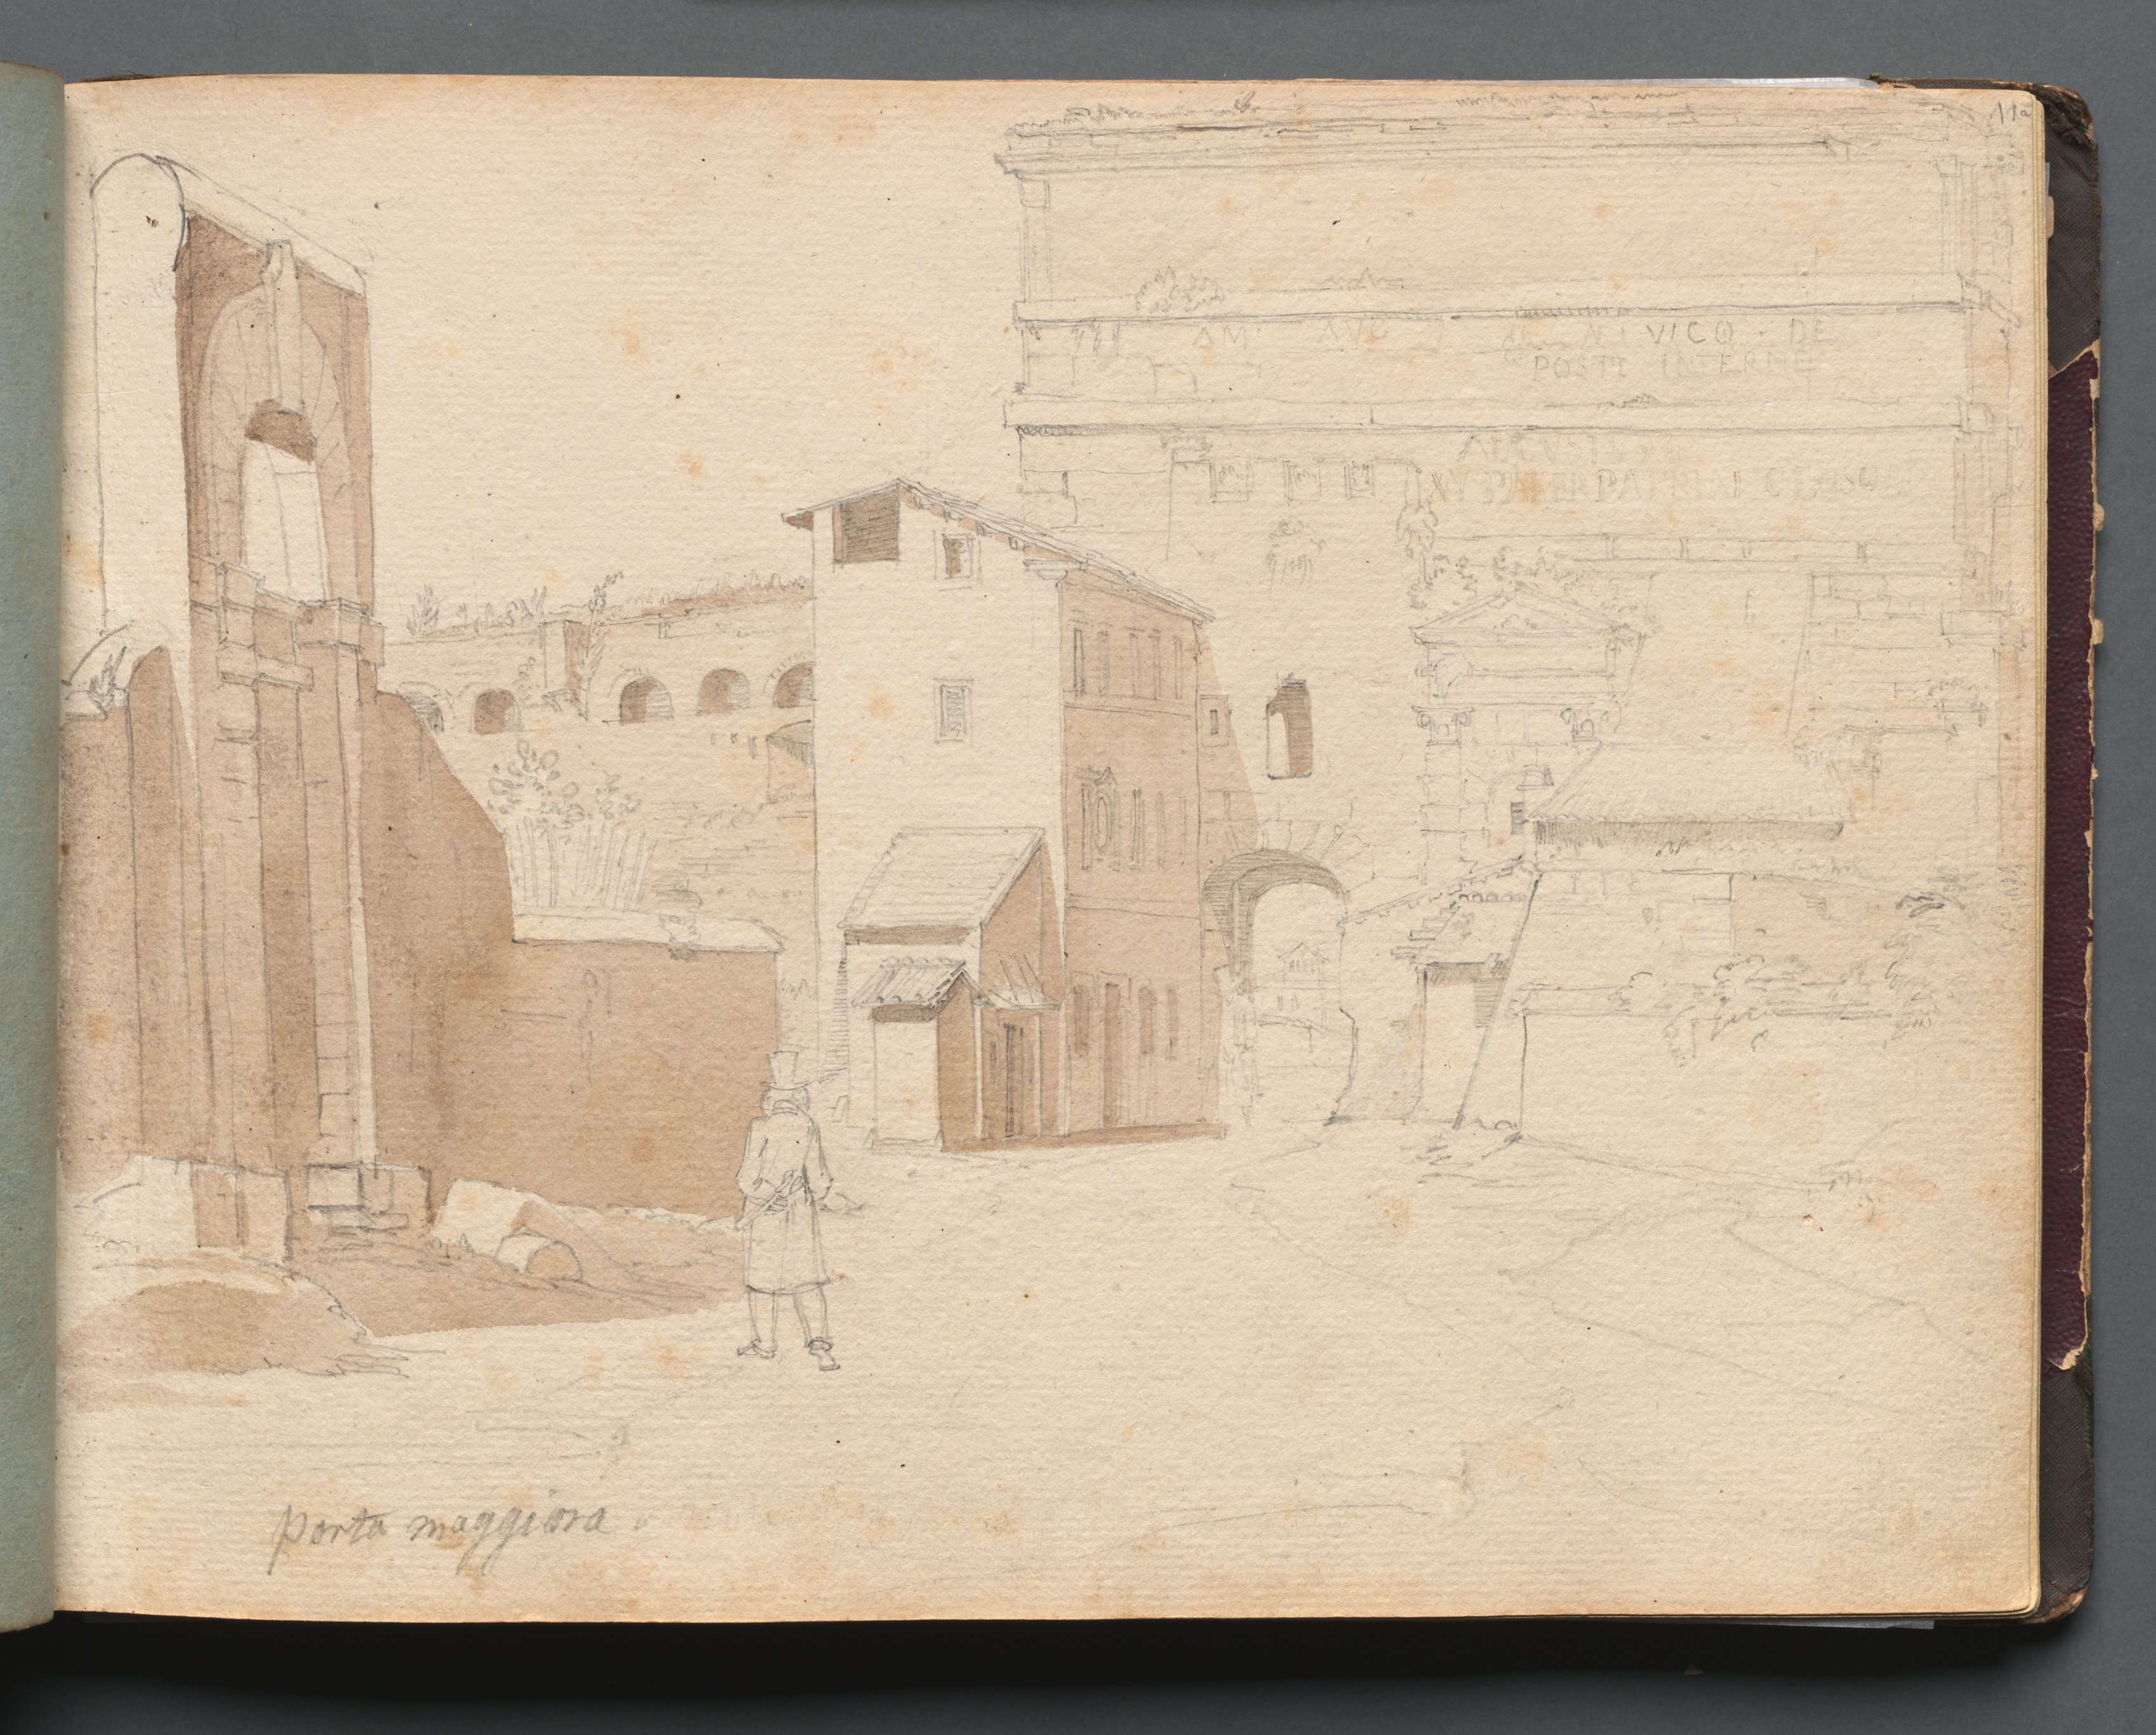 Album with Views of Rome and Surroundings, Landscape Studies, page 11a: "Porta Maggiore"